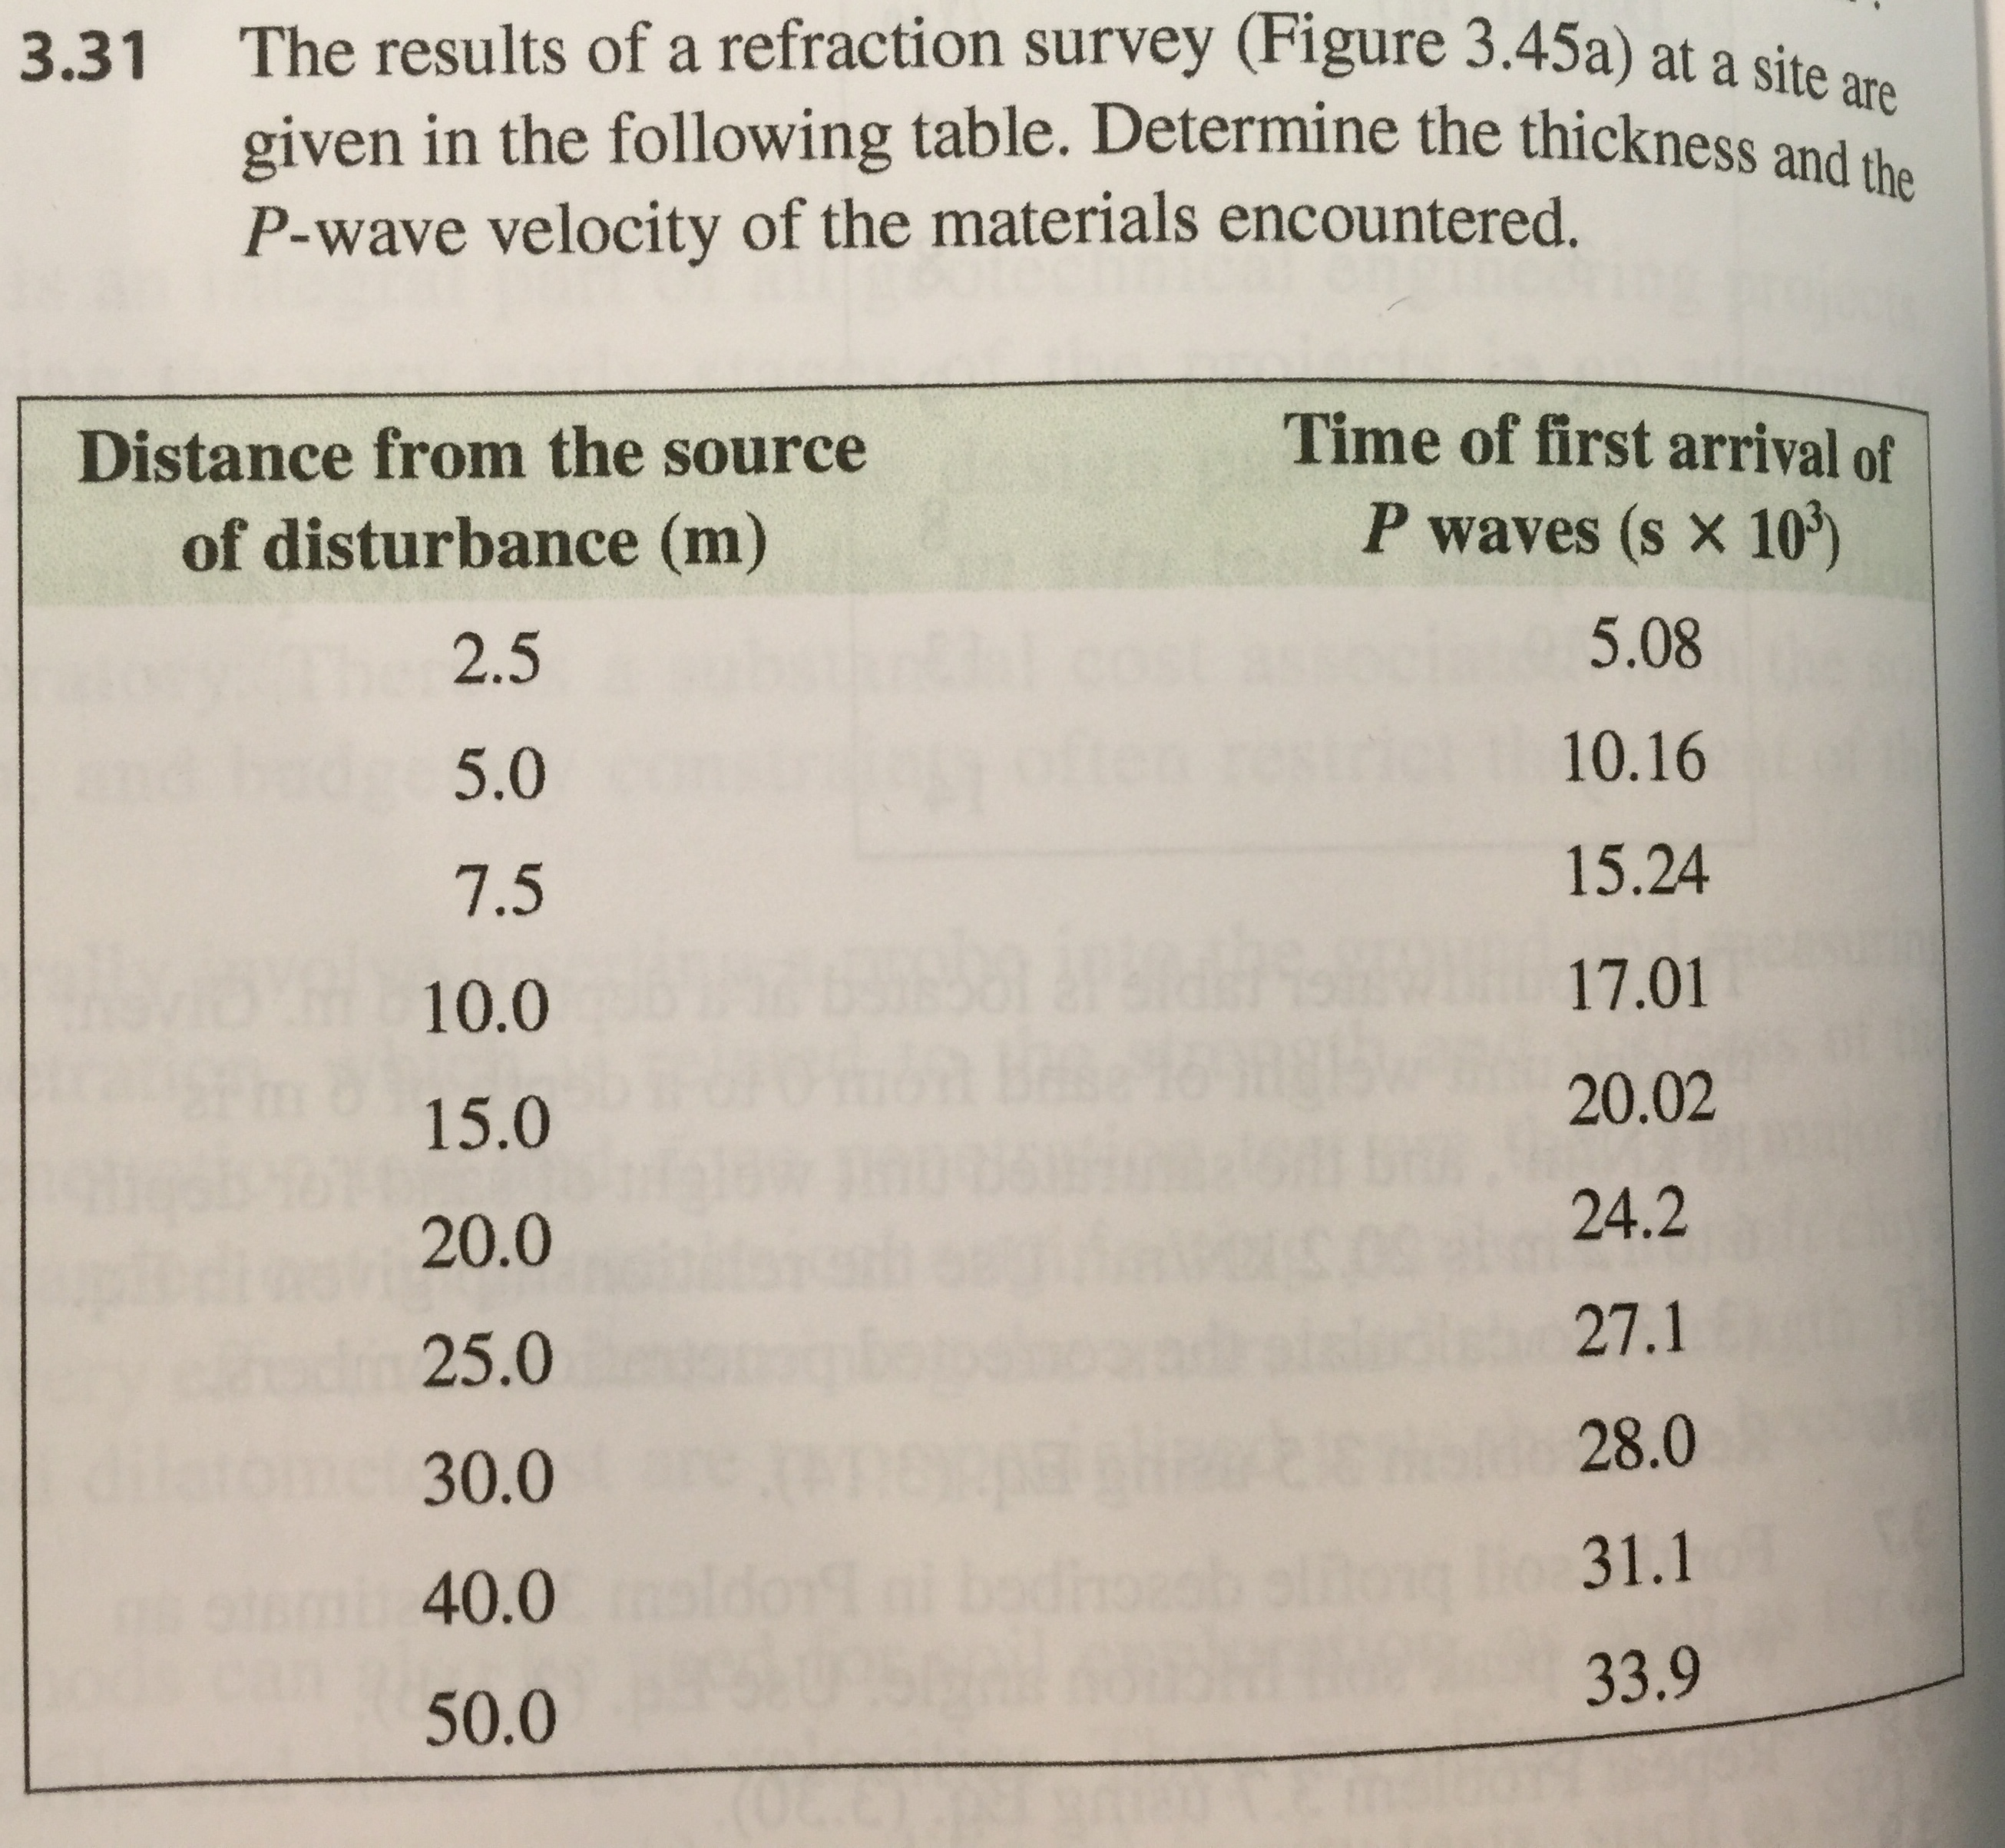 The results of a refraction survey (Figure 3.45a) at a site
given in the following table. Determine the thickness and
P-wave velocity of the materials encountered.
3.31
are
Time of first arrival of
P waves (s x 103)
Distance from the source
of disturbance (m)
2.5
5.0
7.5
10.0
15.0
20.0
25.0
30.0
40.0
50.0
5.08
10.16
15.24
17.01
20.02
24.2
27.1
28.0
31.1
33.9
